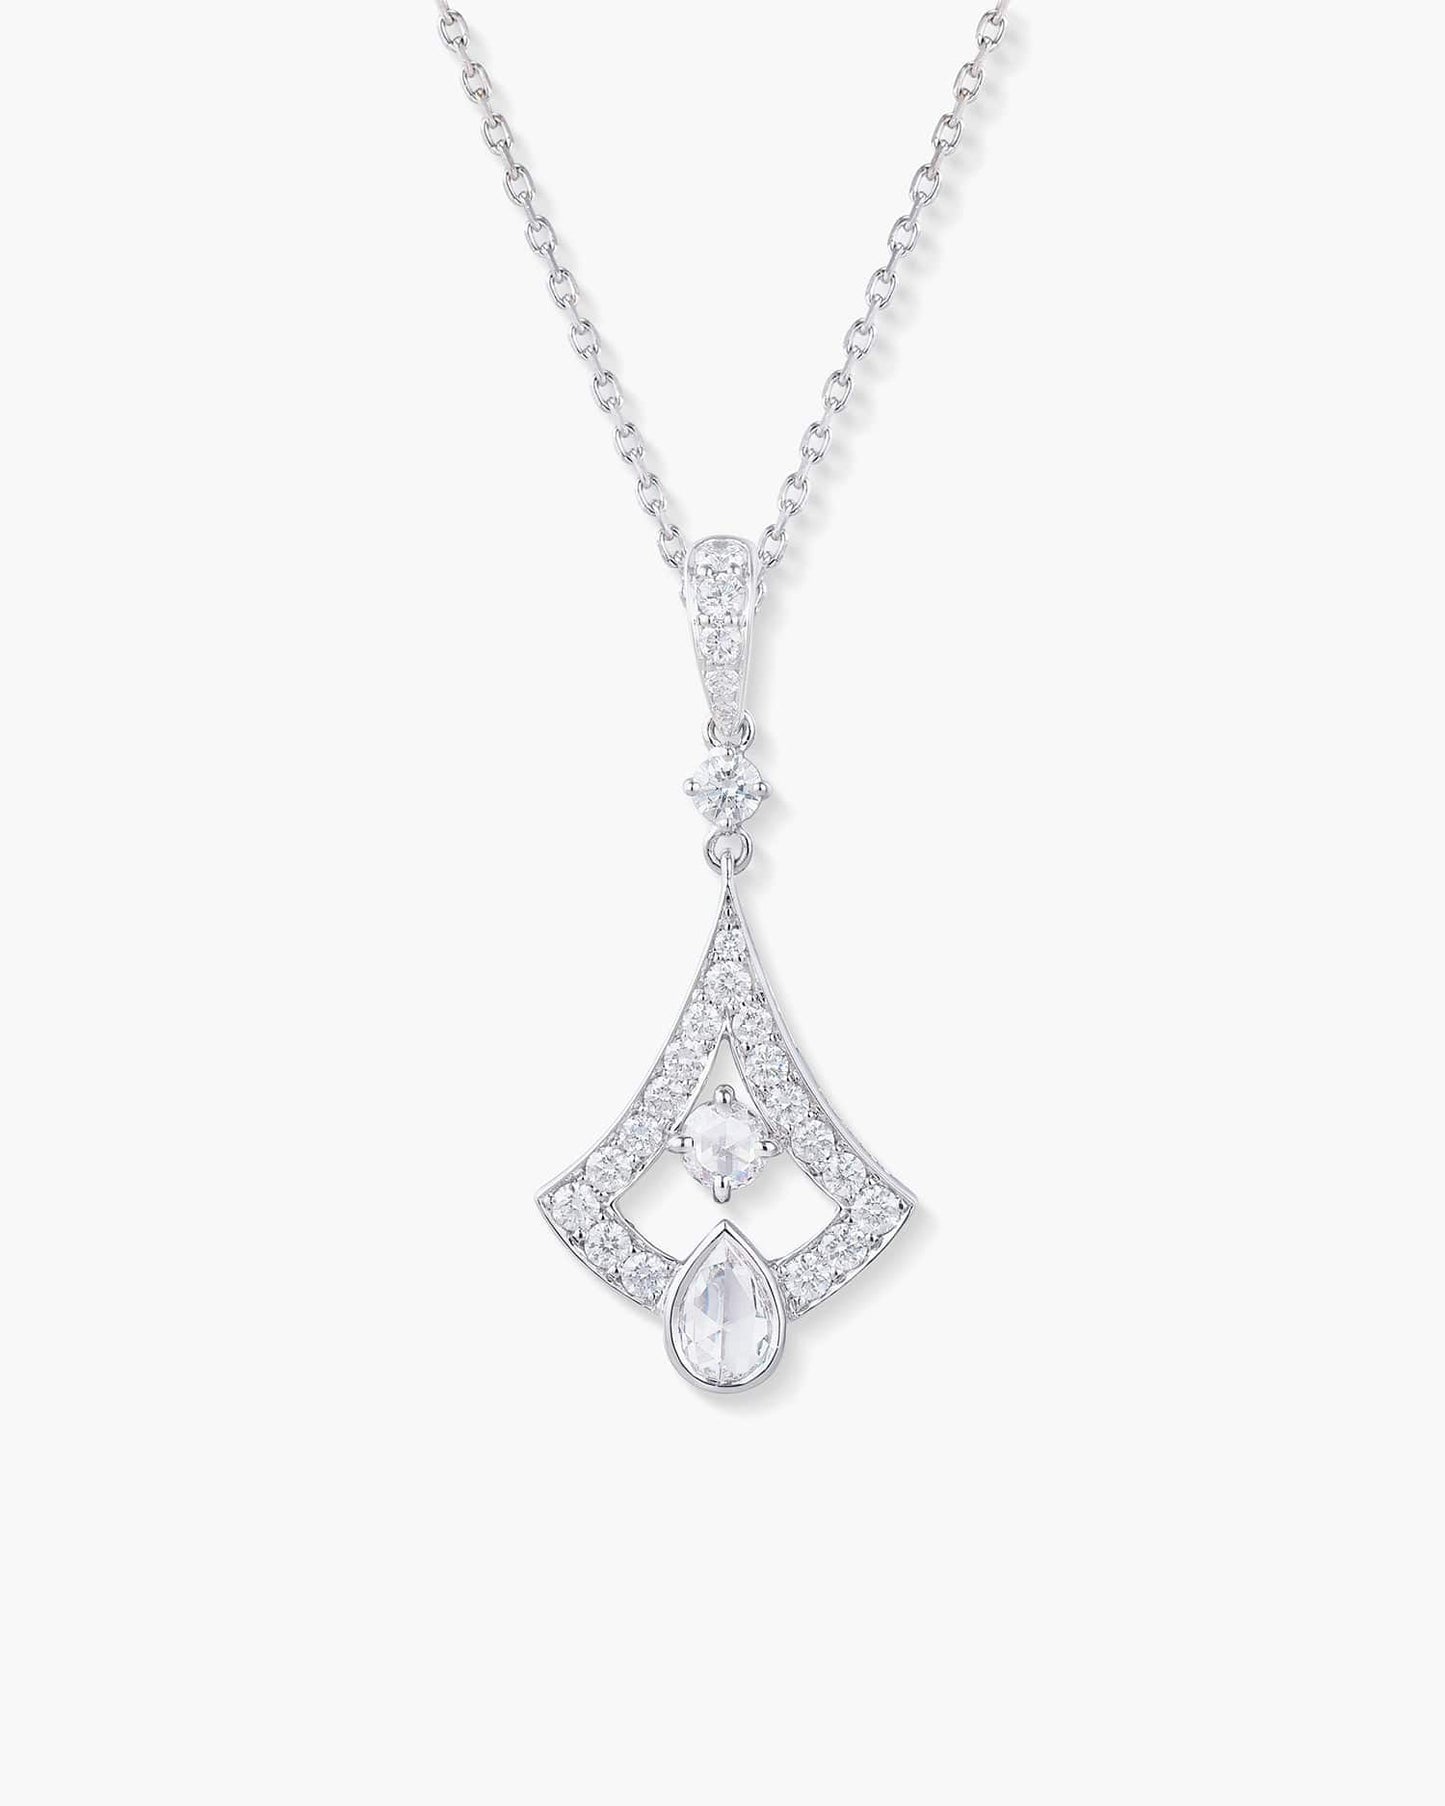 Pear Shape and Round Rose Cut Diamond Pendant Necklace, 0.80 carats